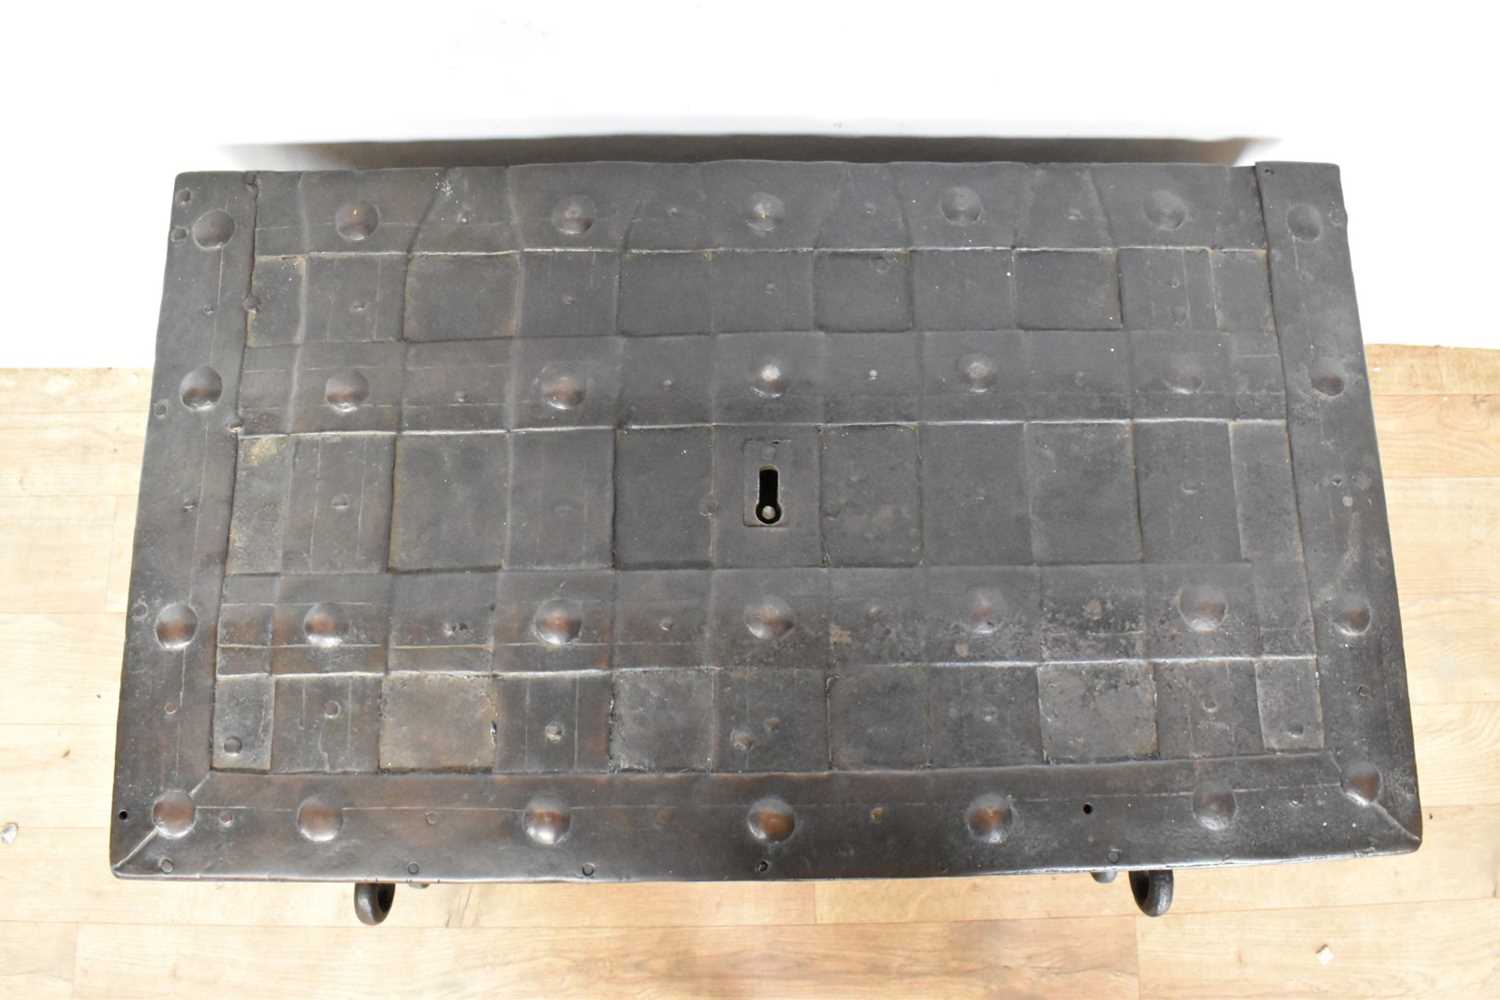 17th century German iron Armada chest with intricate locking system, key marked S. Morden - Image 9 of 23